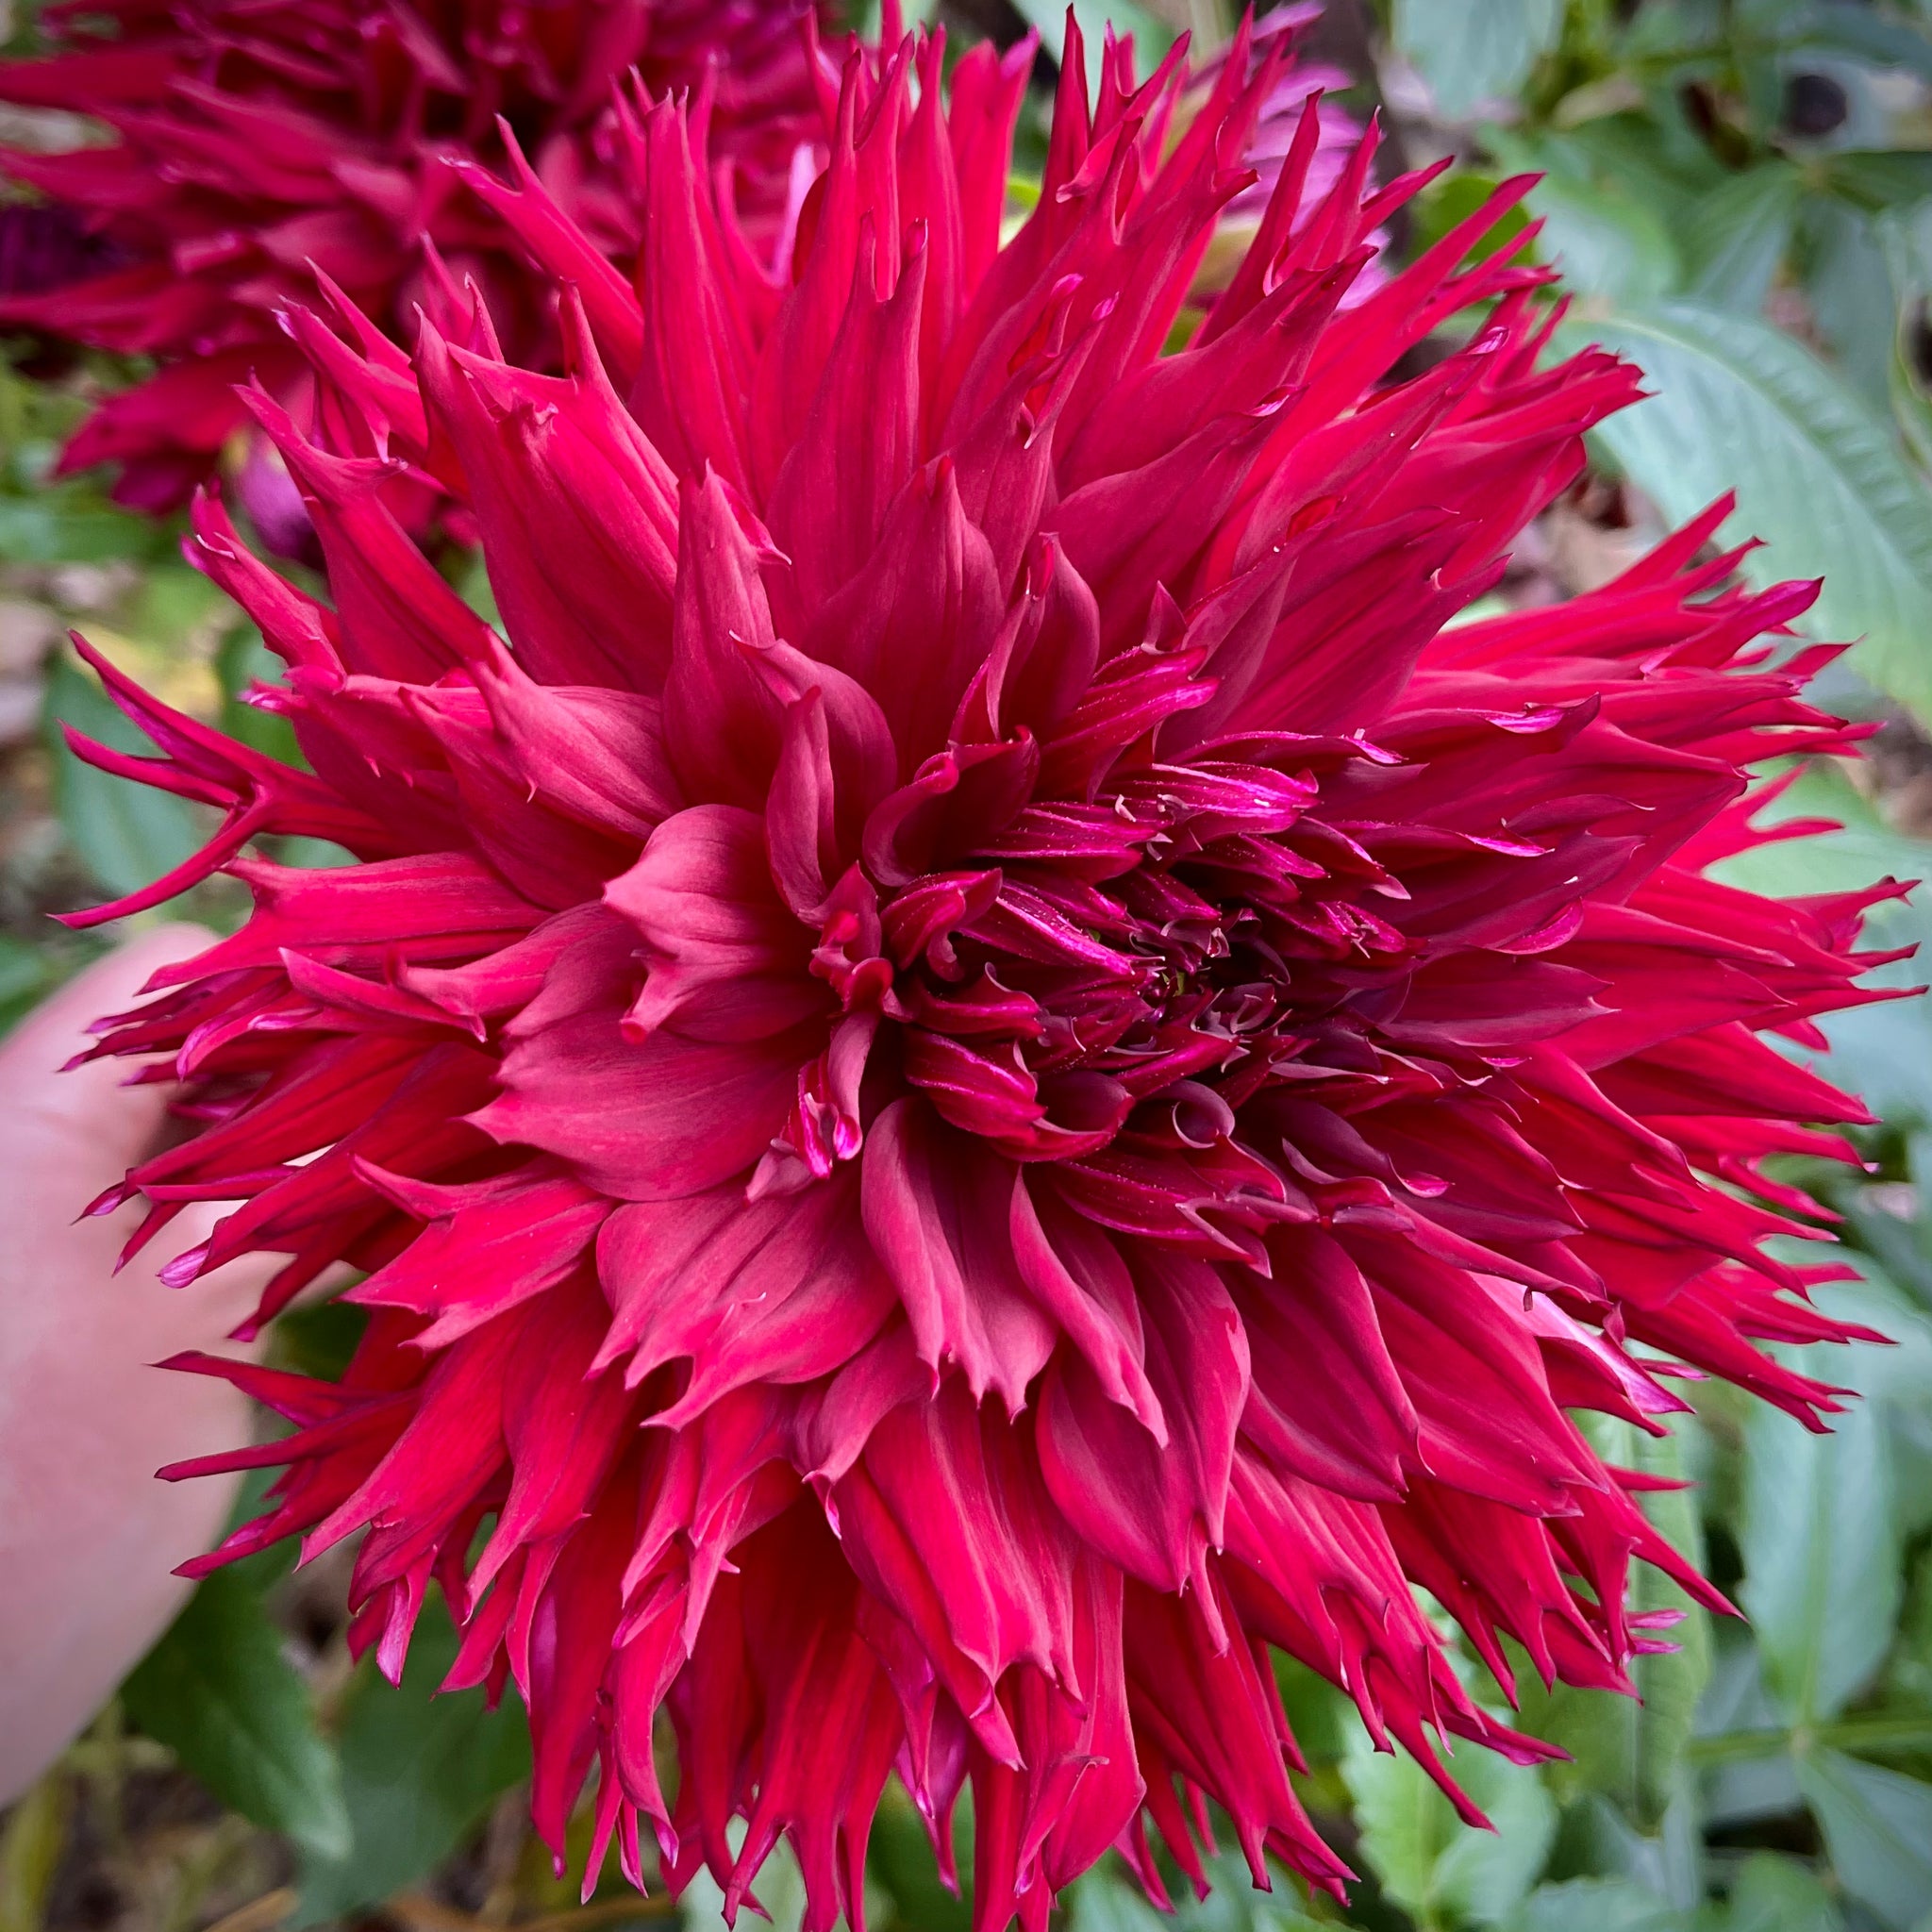 Massive deep red flowers measure up to 10" across. Grow in groups for guaranteed garden impact. Spectacular at the back of a border or in oversized floral arrangements. Deep velvety red with strong growth habit. A must for lovers of laciniated dinnerplate Dahlias. Buy dahlia tubers online www.lilysgardenstore.com